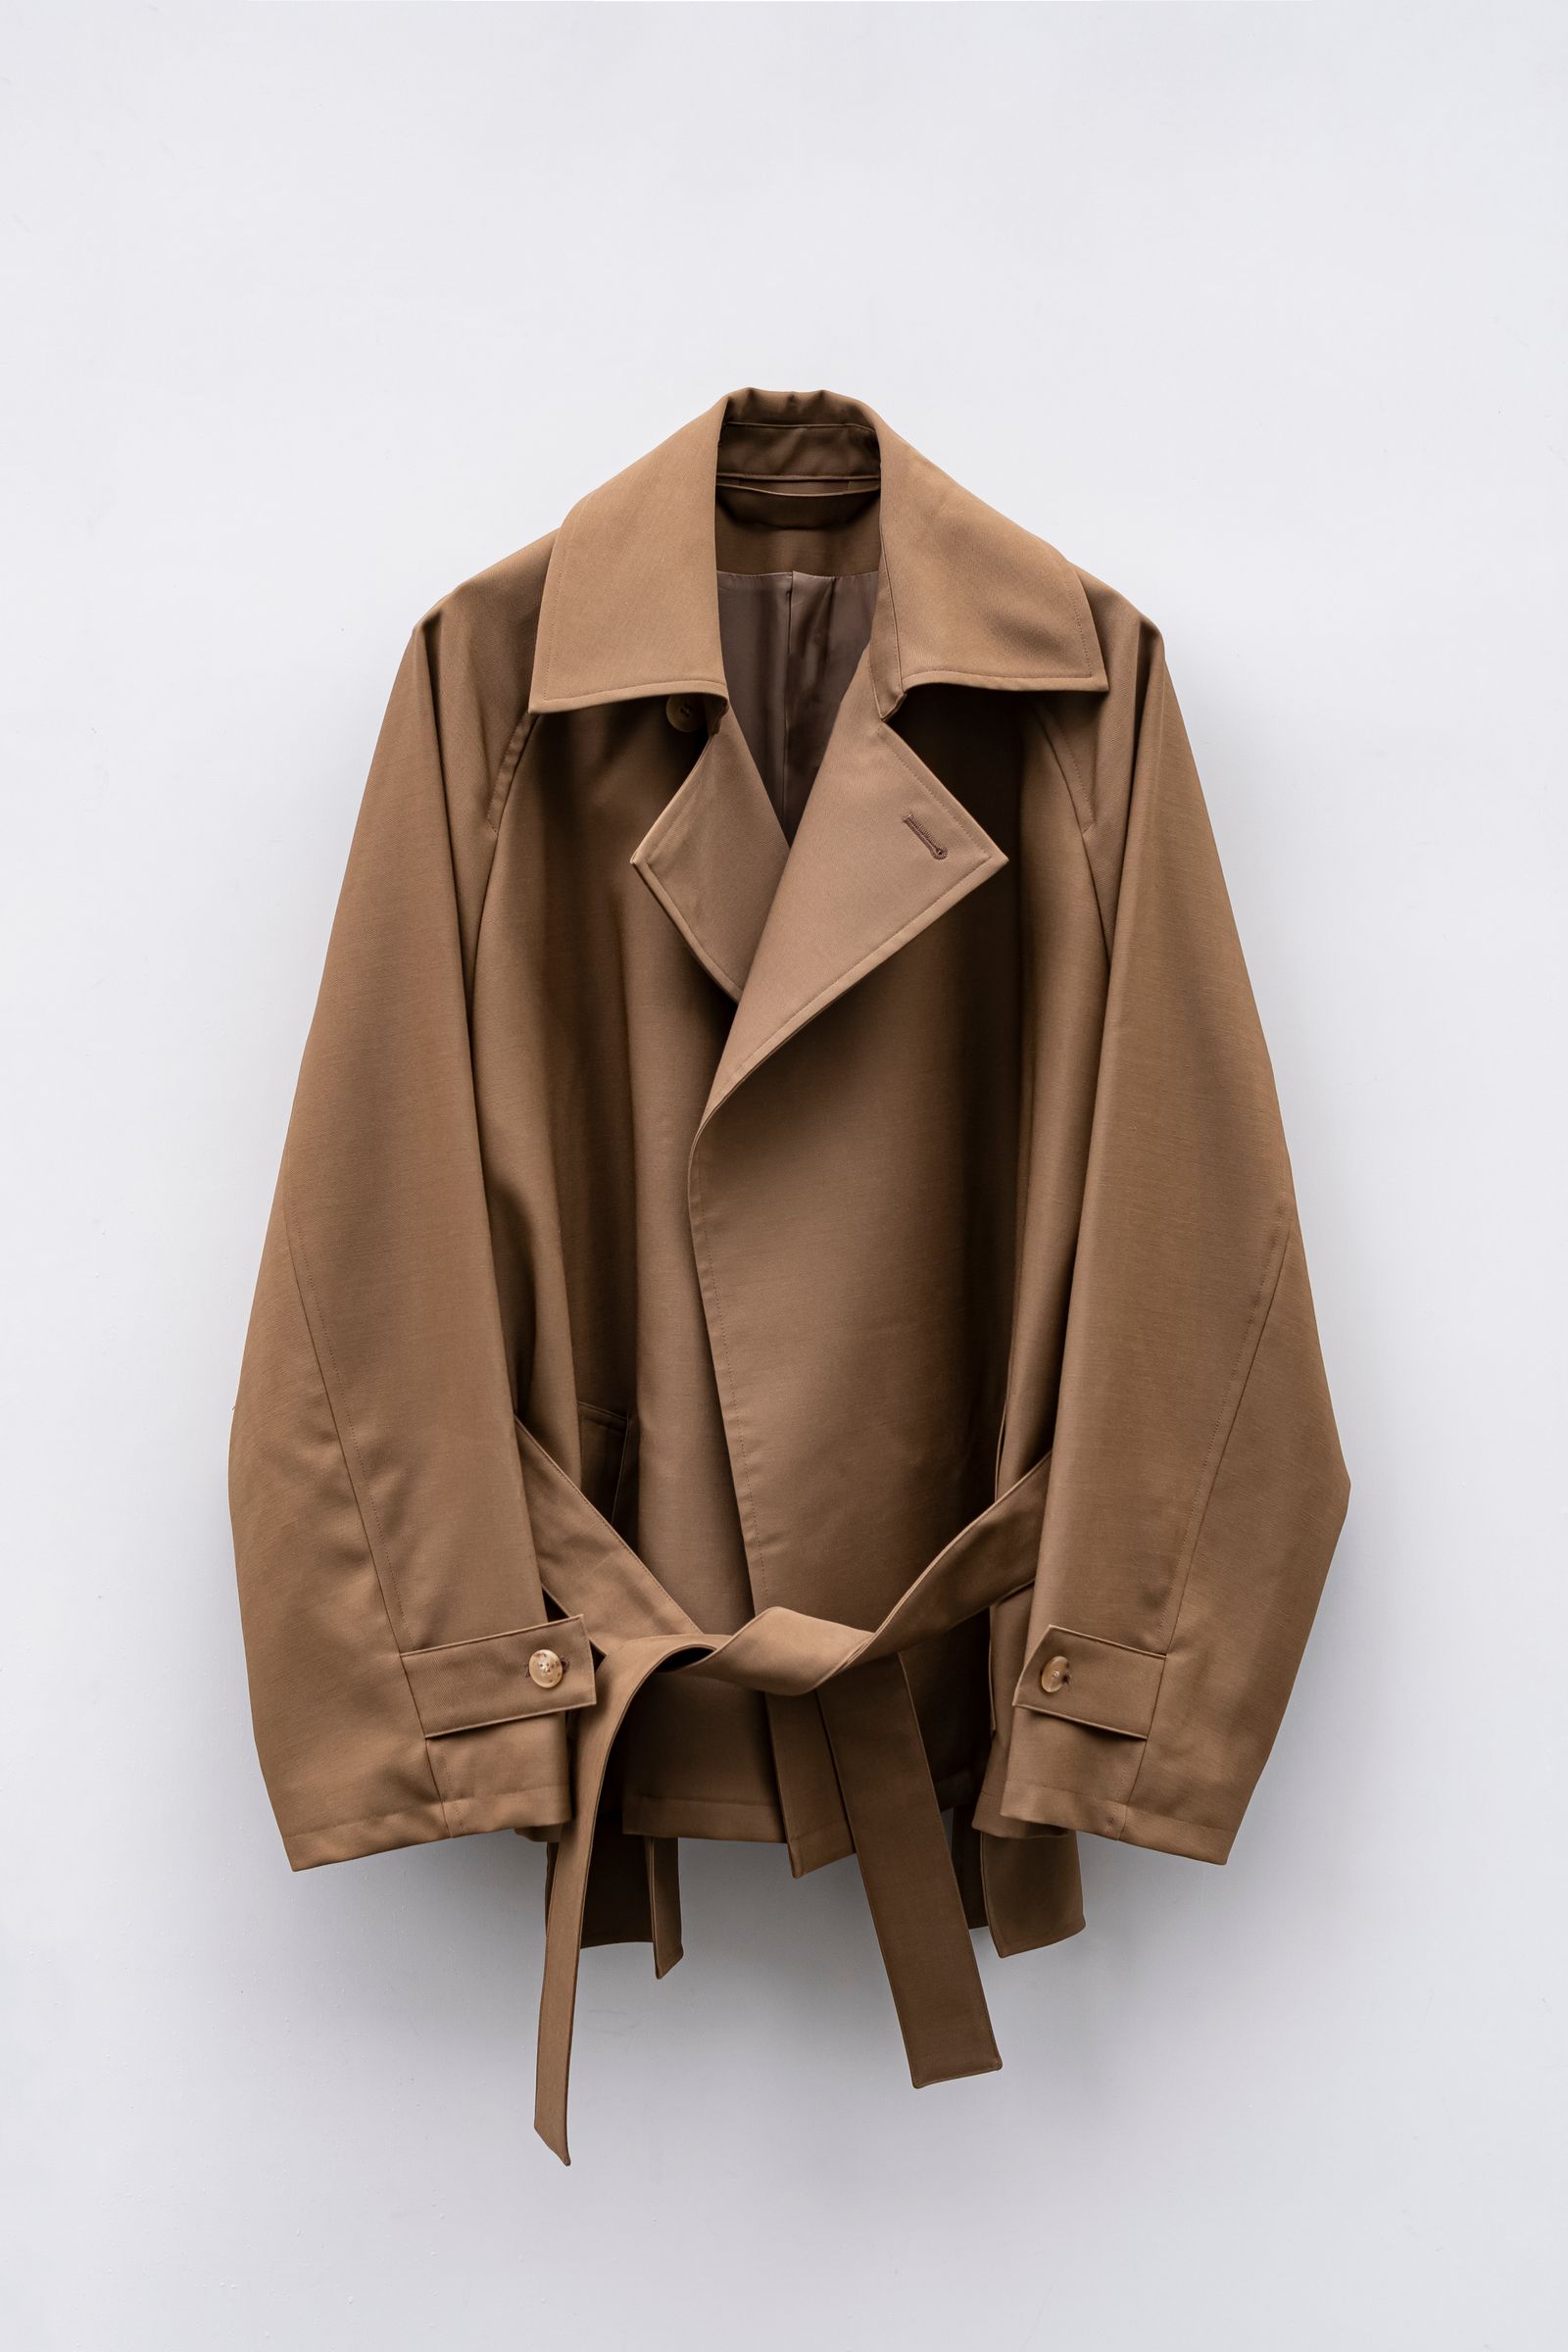 Blanc YM - Short trench coat / Brown | Retikle Online Store